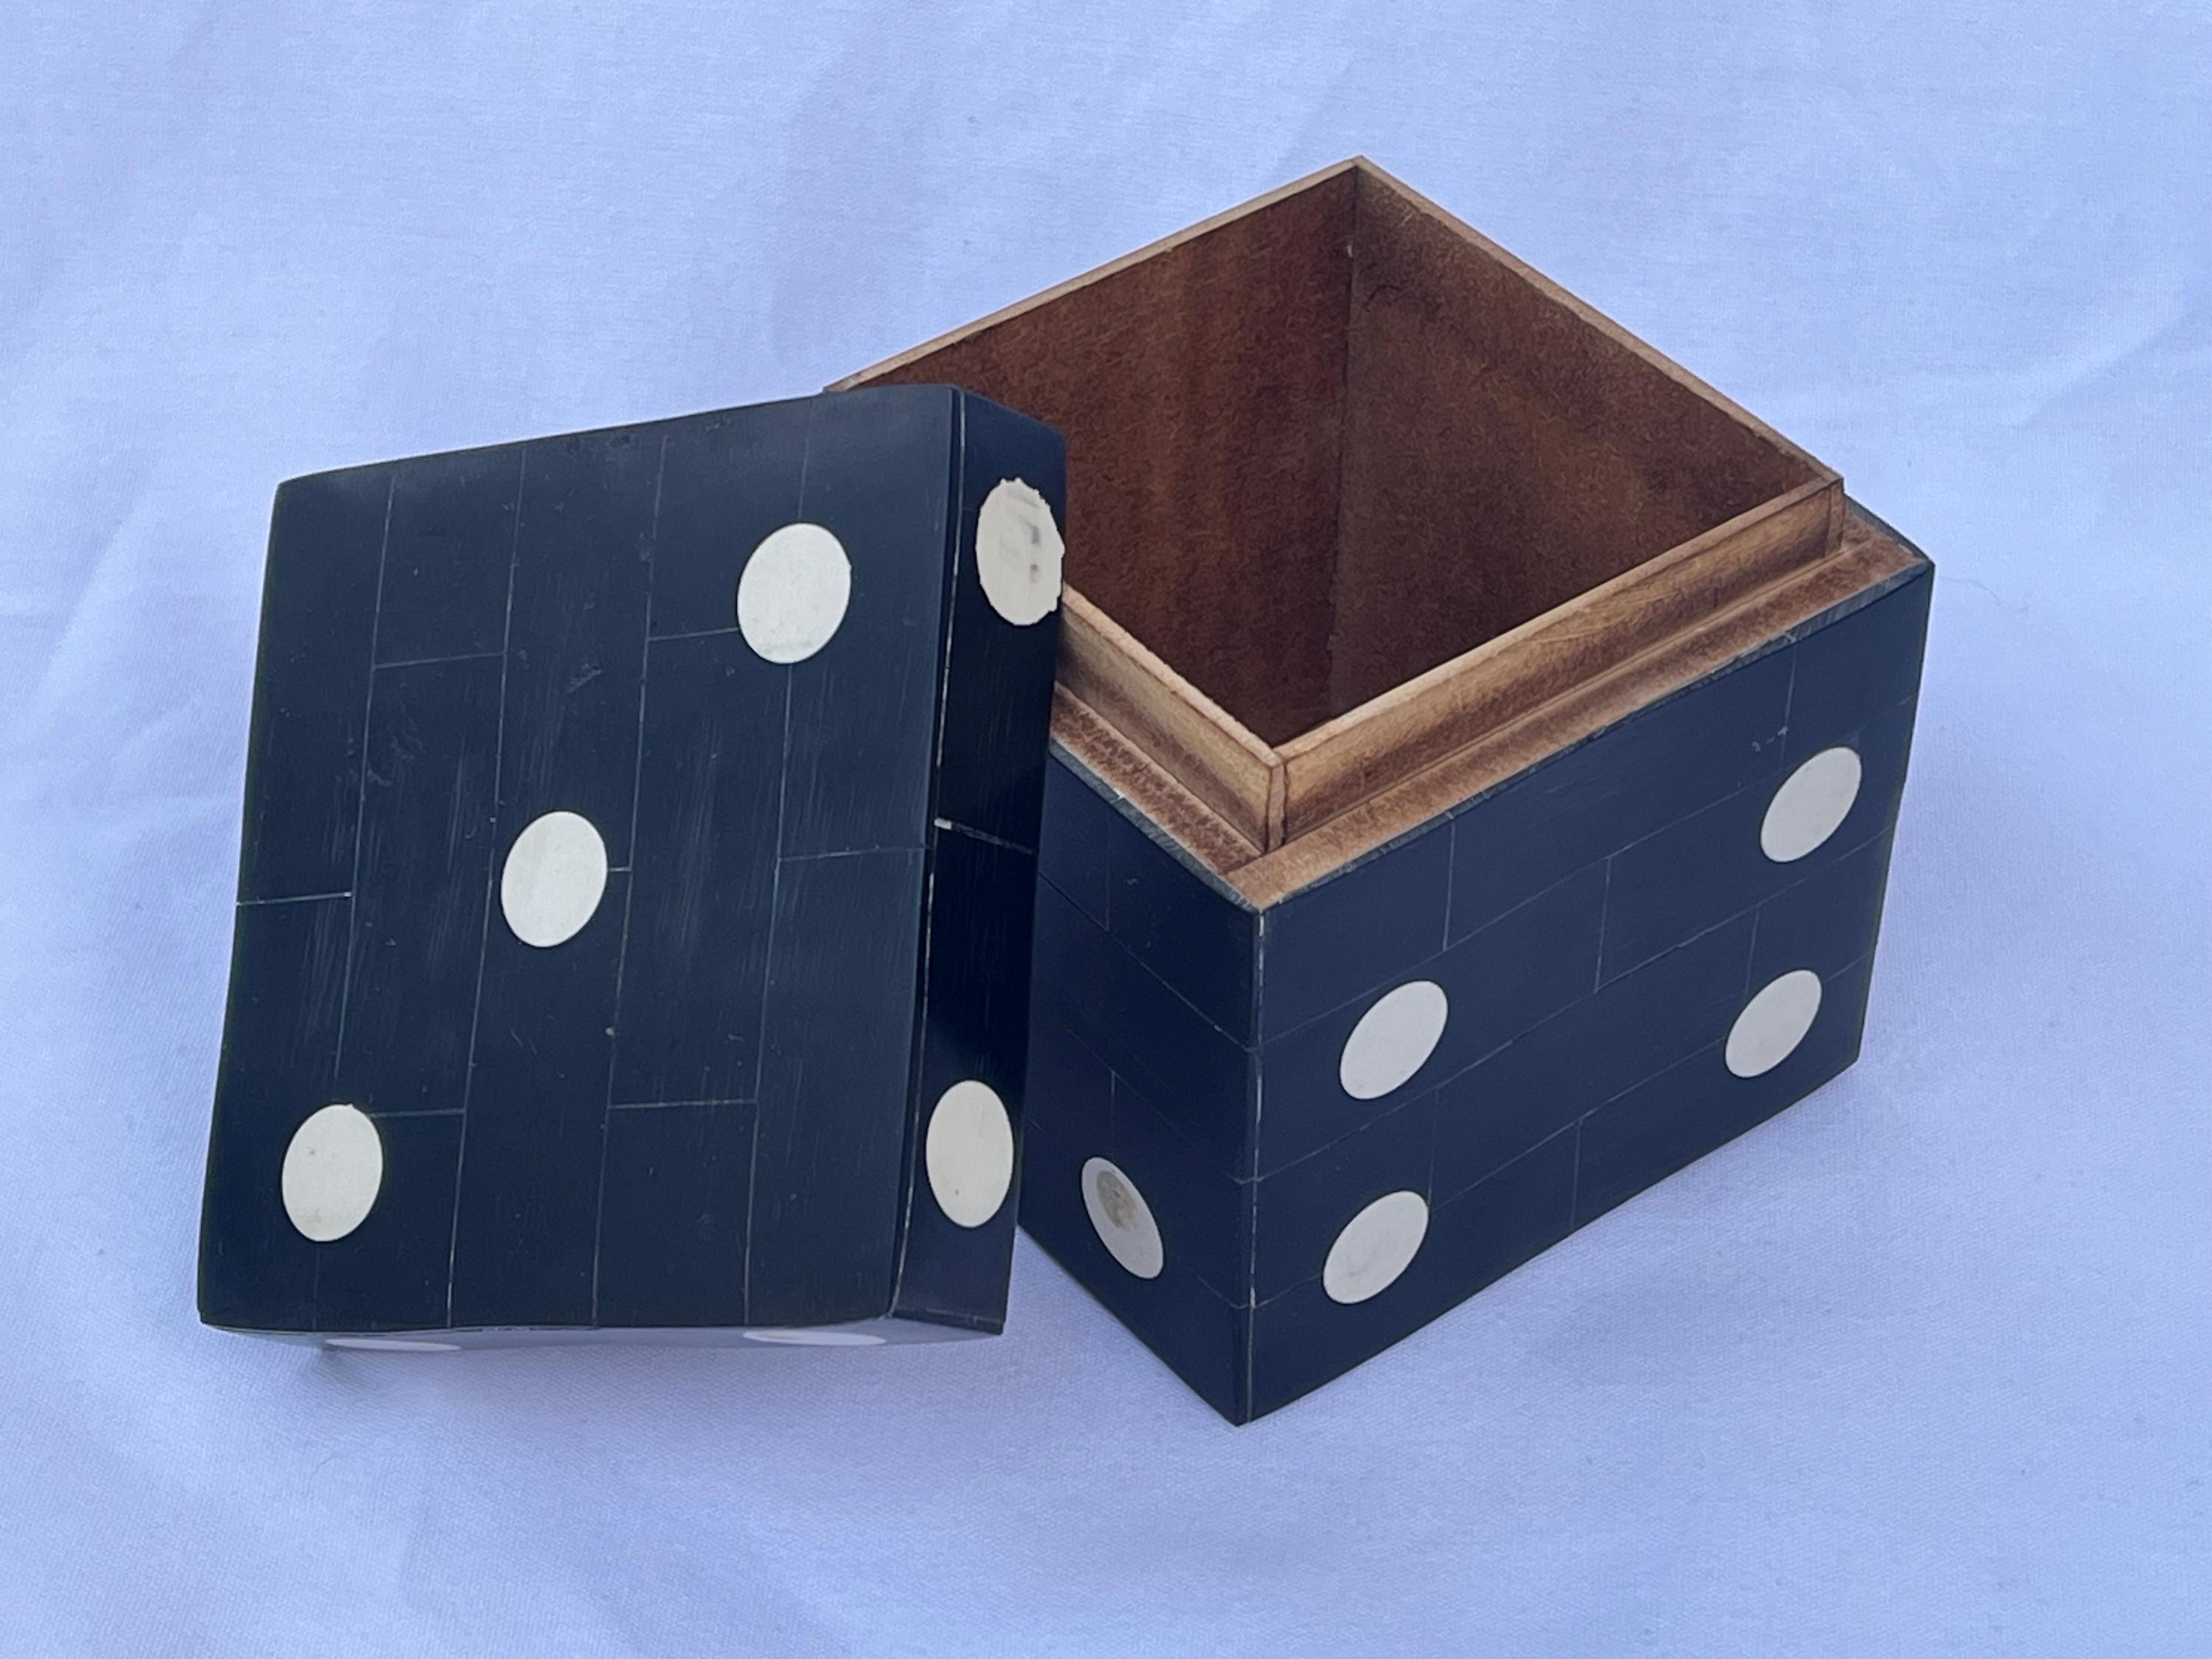 Tessellated Vintage Dice or Die Lidded Cube Box Paperweight Desk Accessory  For Sale 3